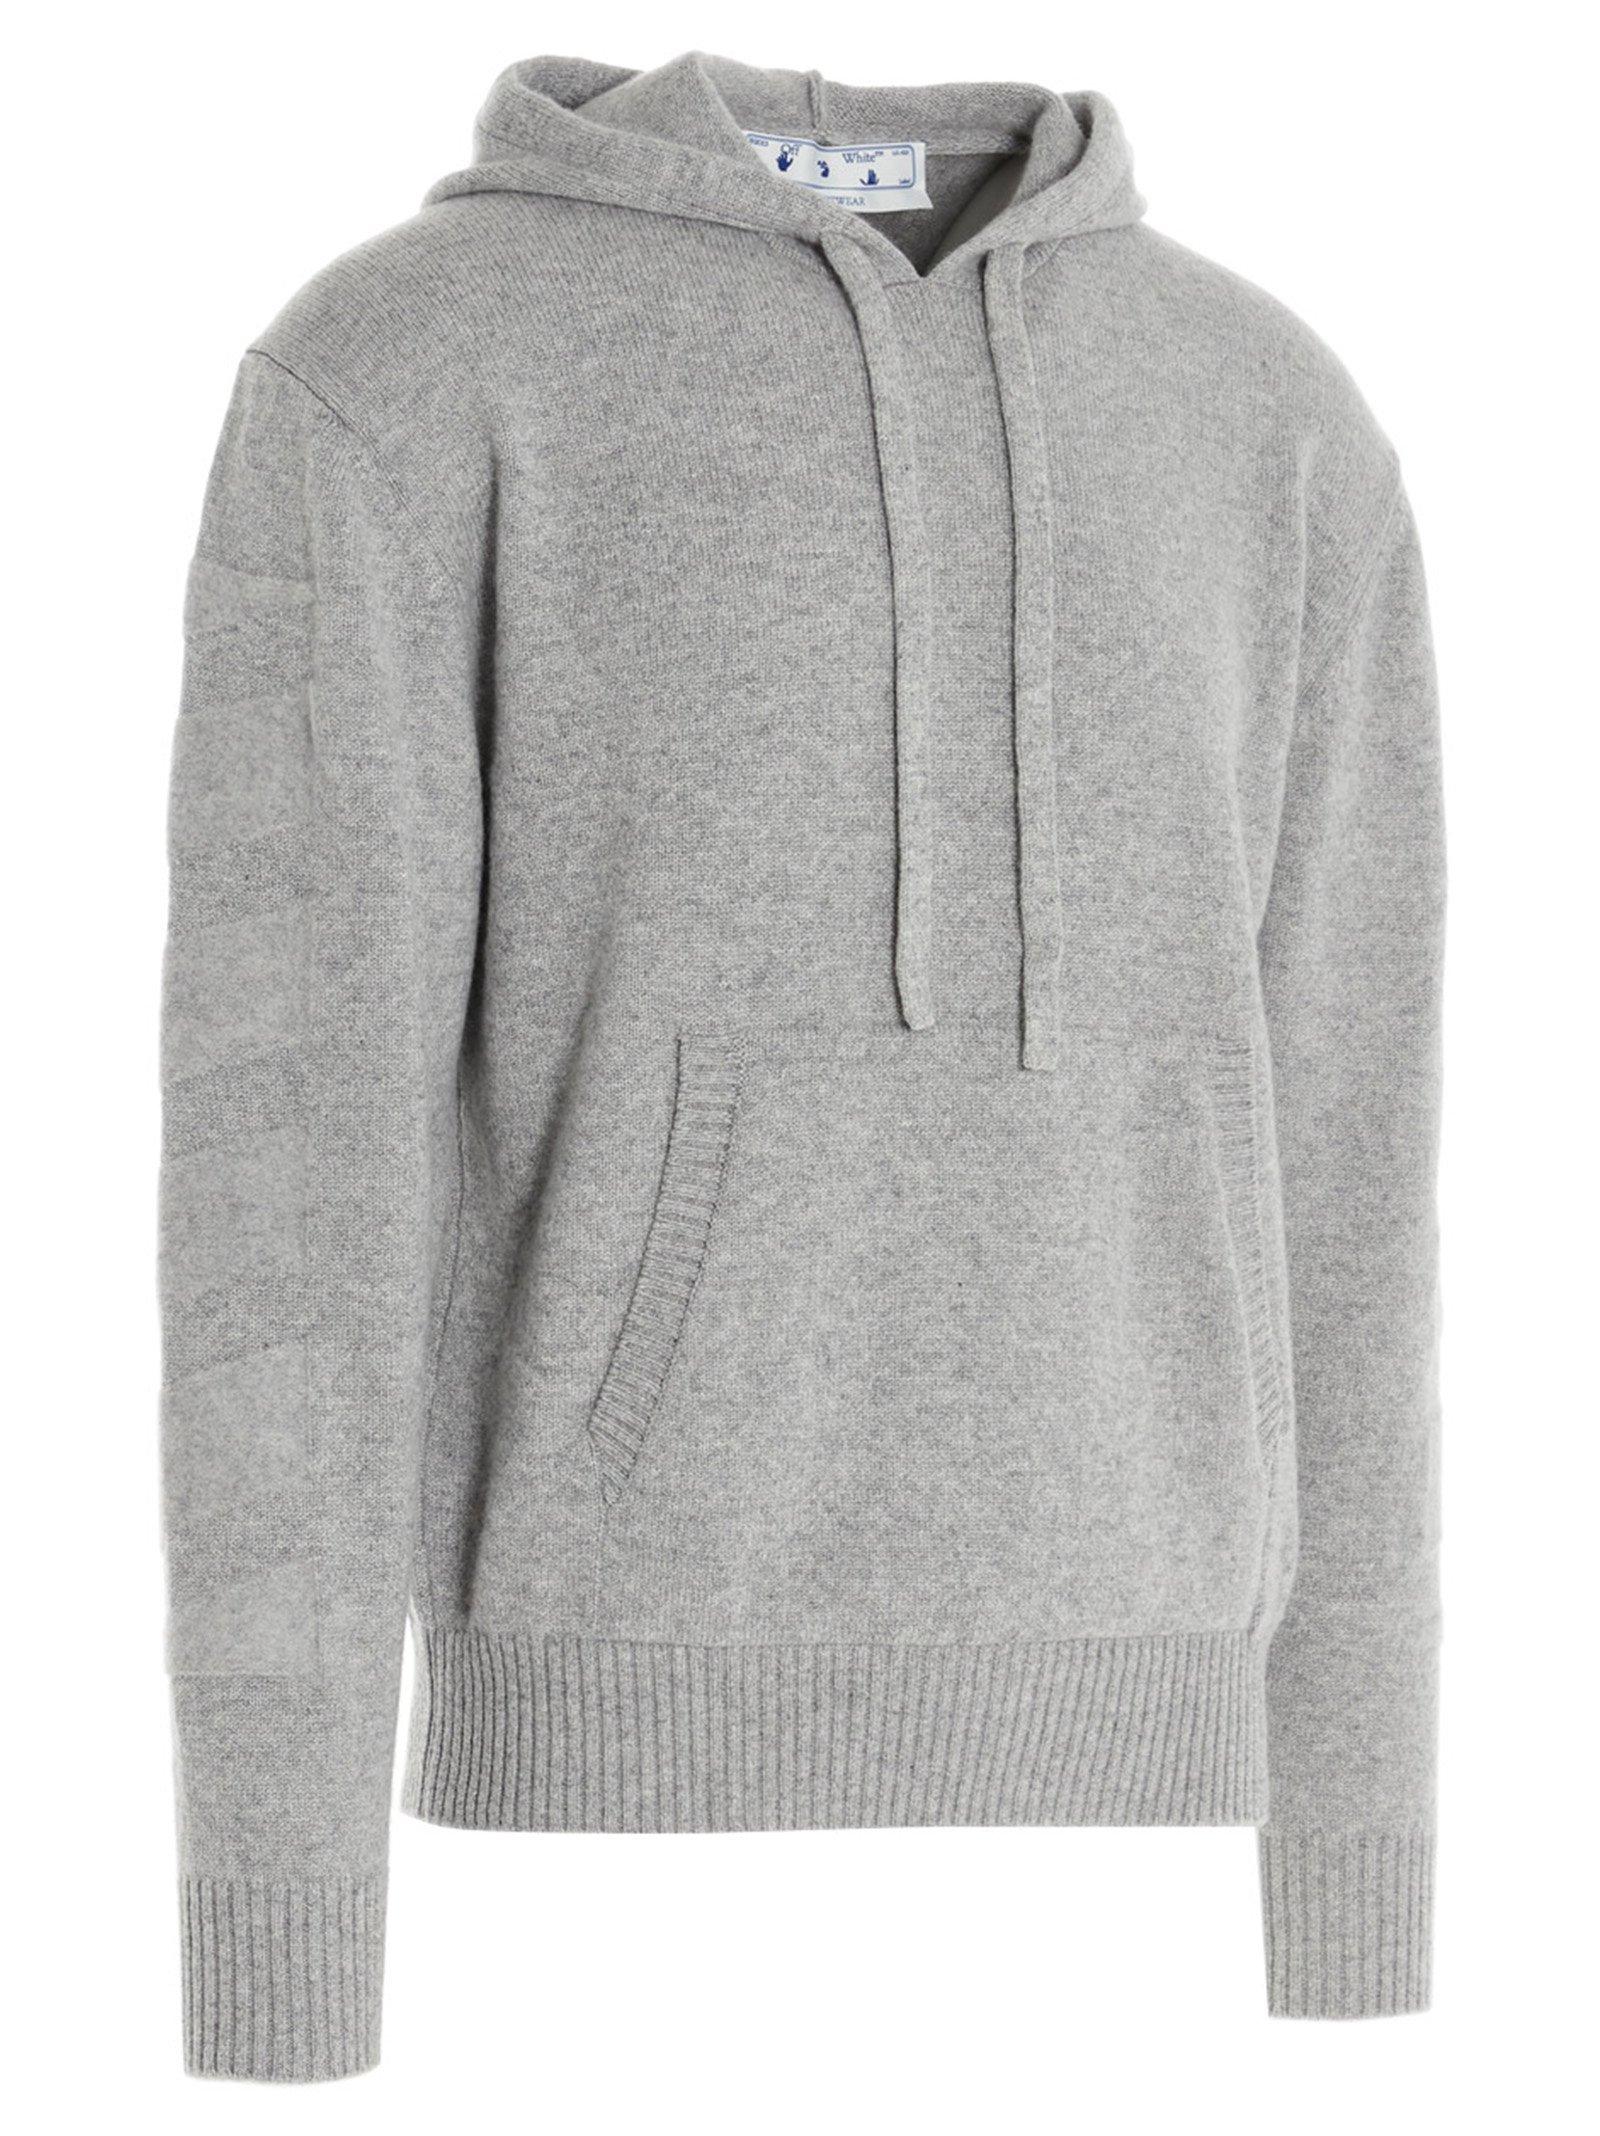 Off-White c/o Virgil Abloh Diagonal Cashmere Hoodie in Grey (Gray) for ...